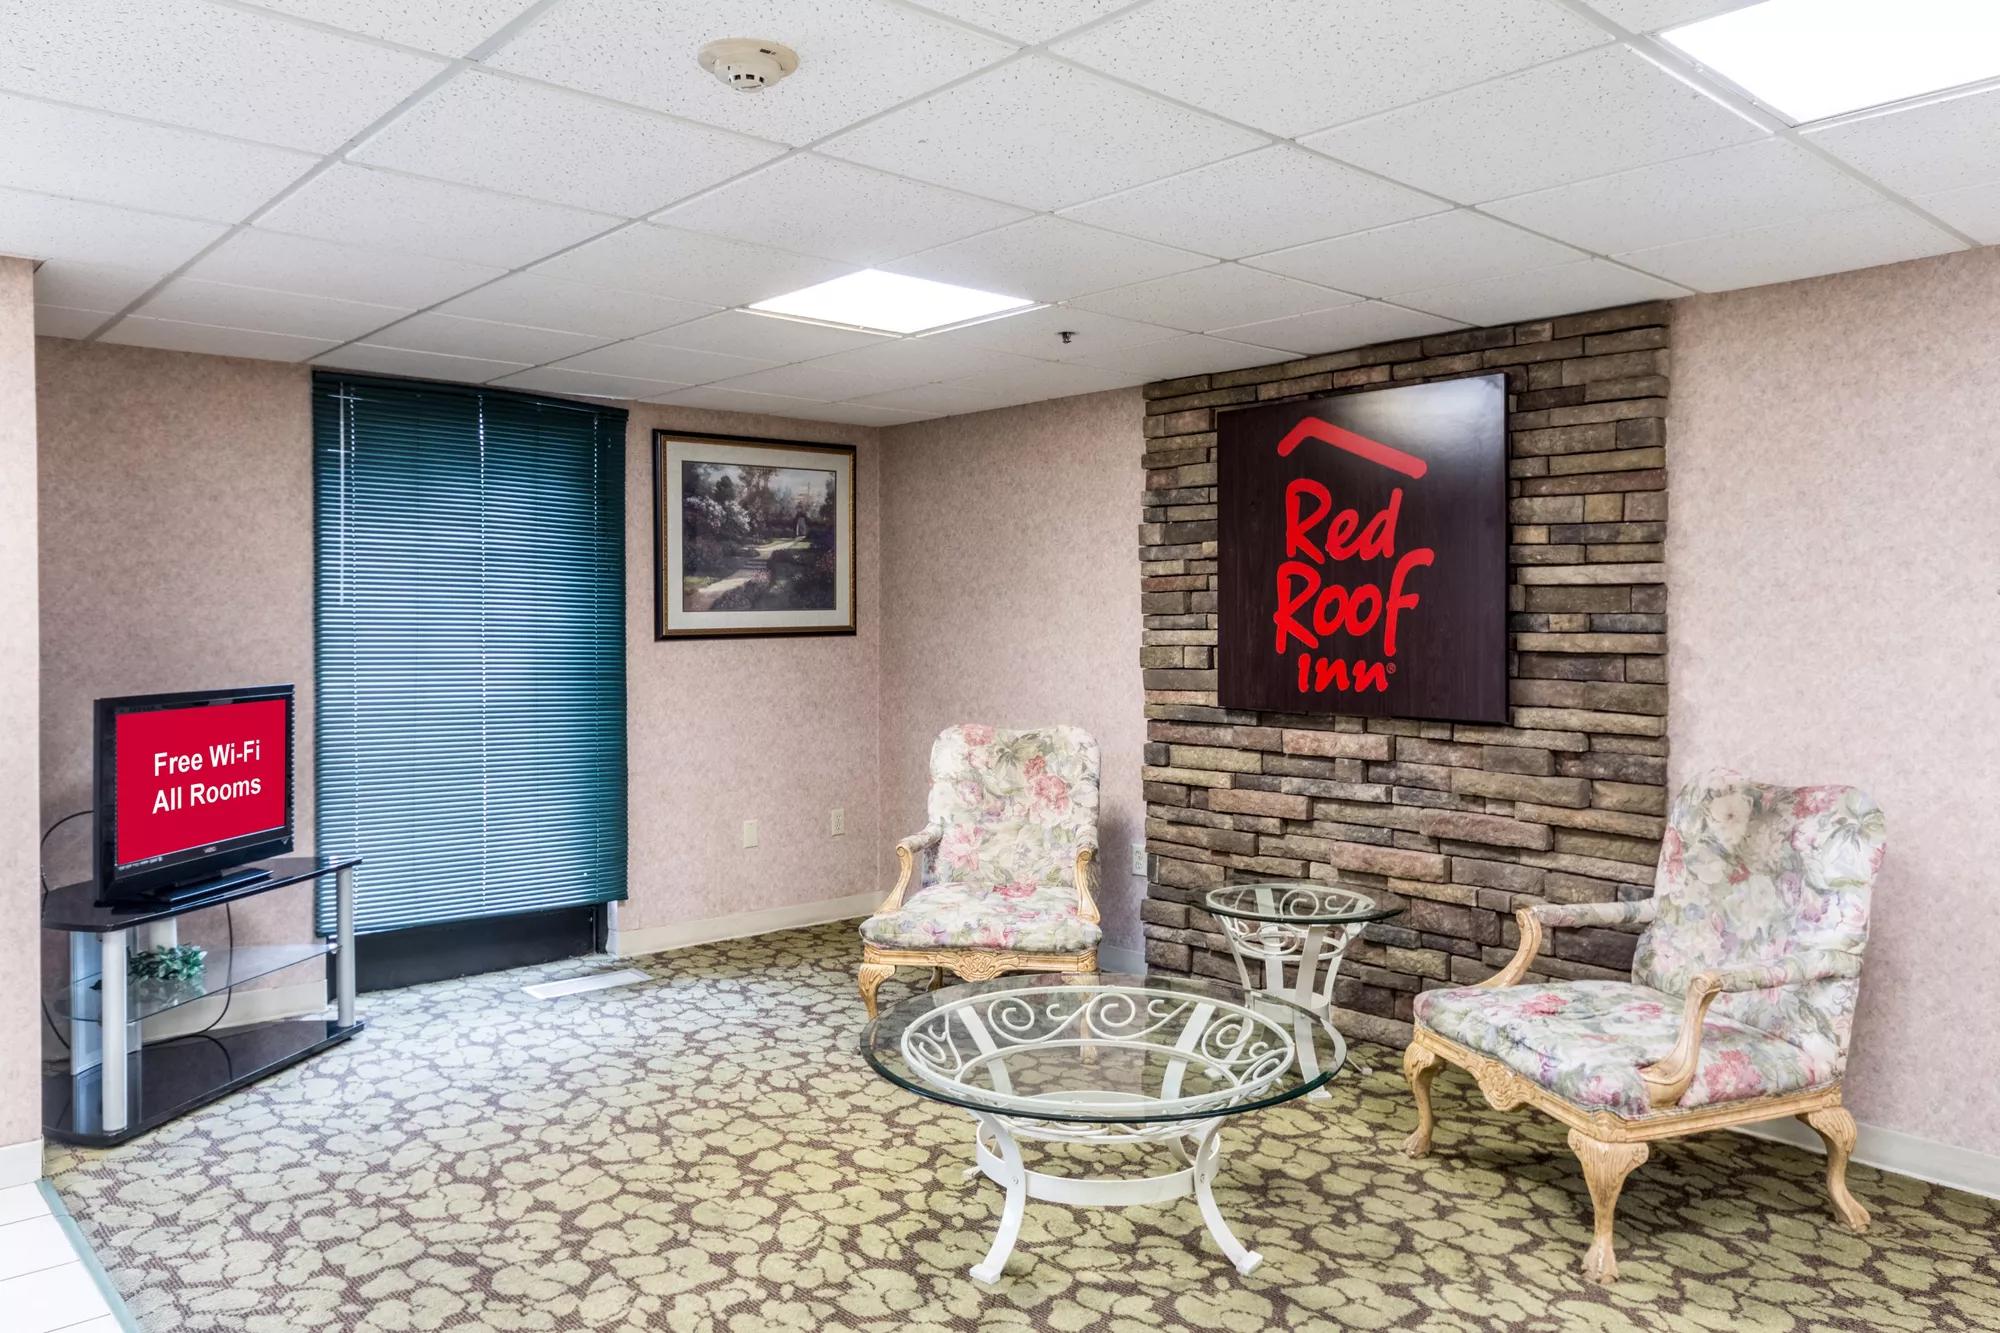 Red Roof Inn Morehead Lobby Sitting Area Image